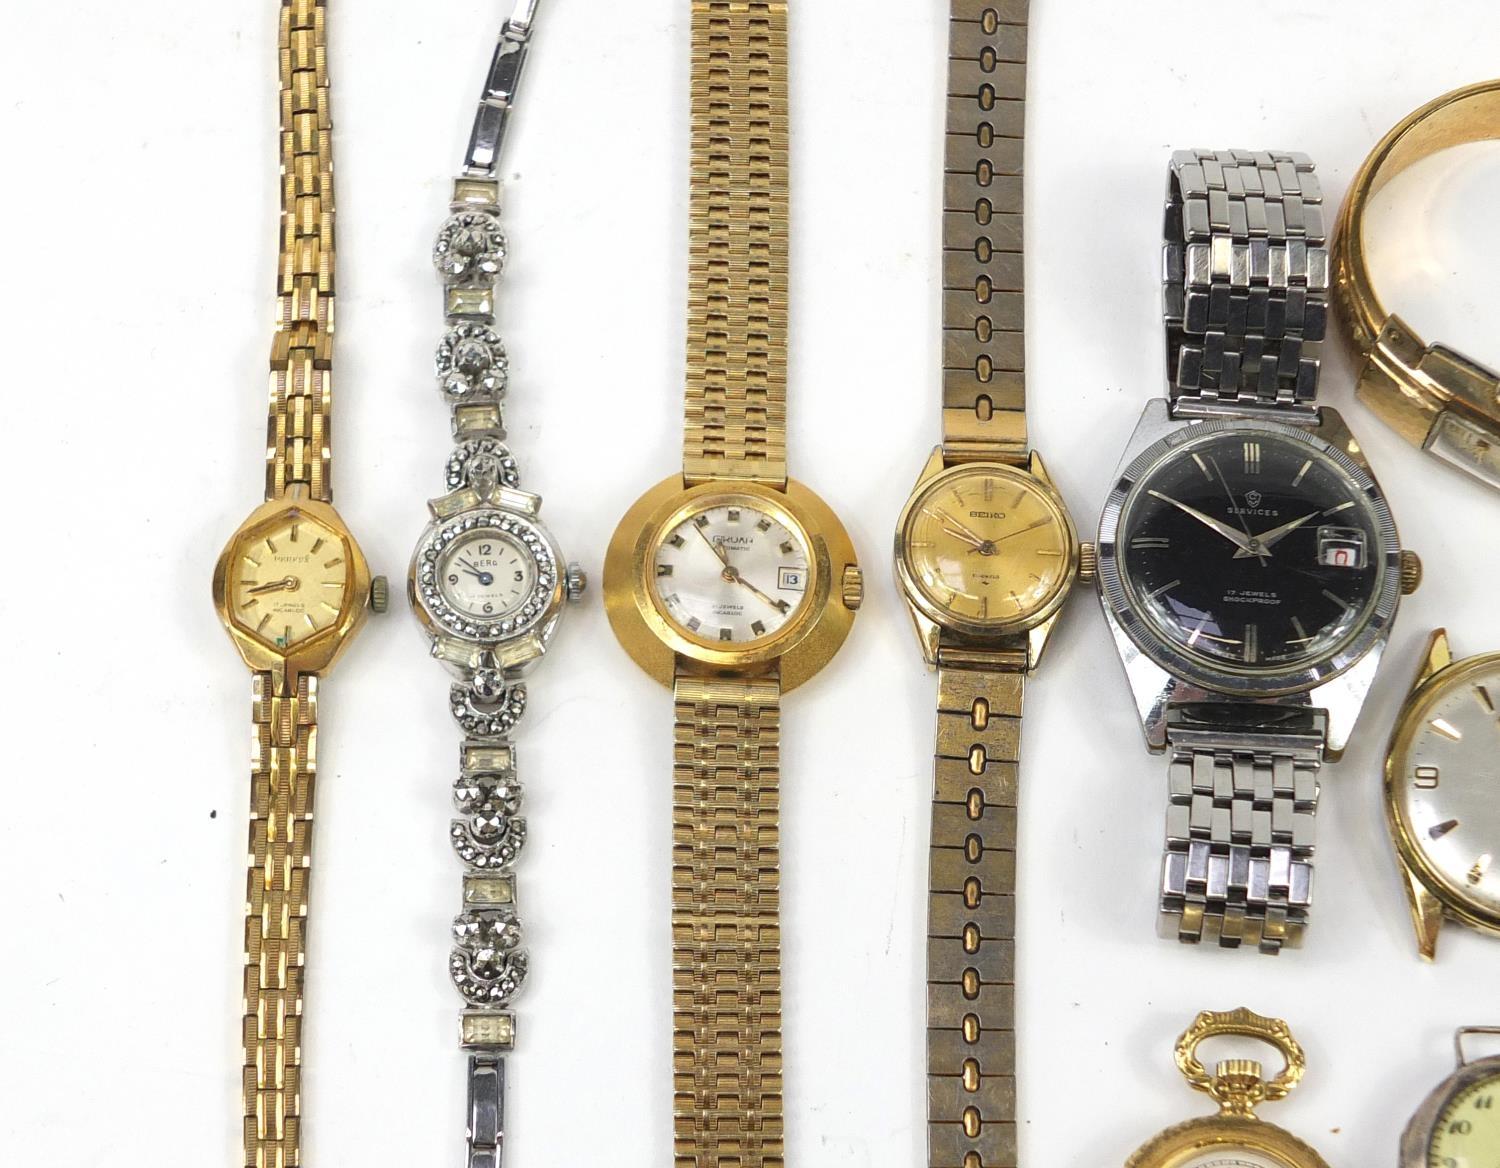 Vintage and later wristwatches including Dupont Automatic, Services, Rotary and Oris - Image 2 of 6